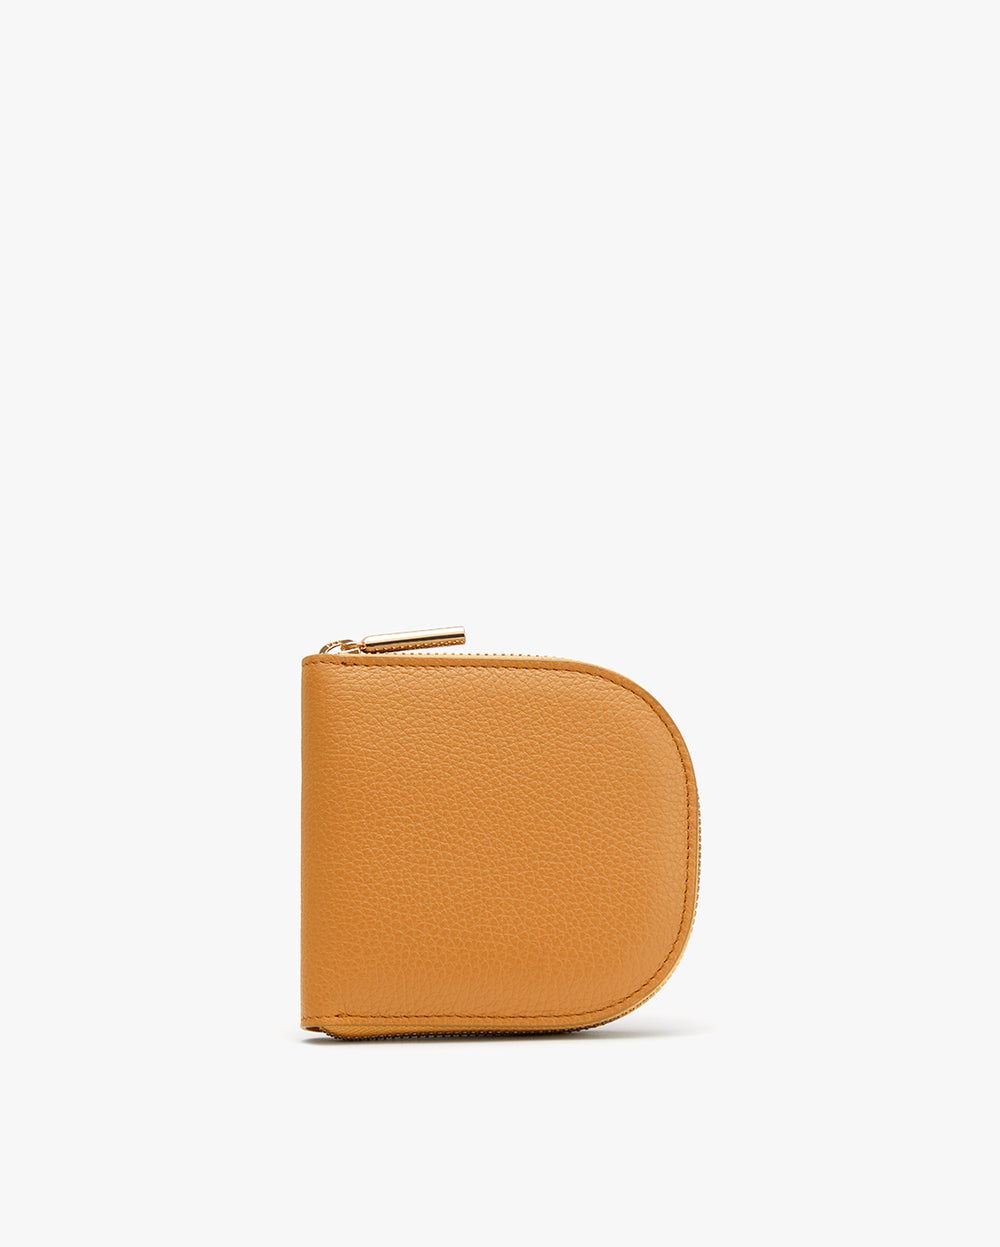 Small wallet with zipper, standing upright against a plain background.